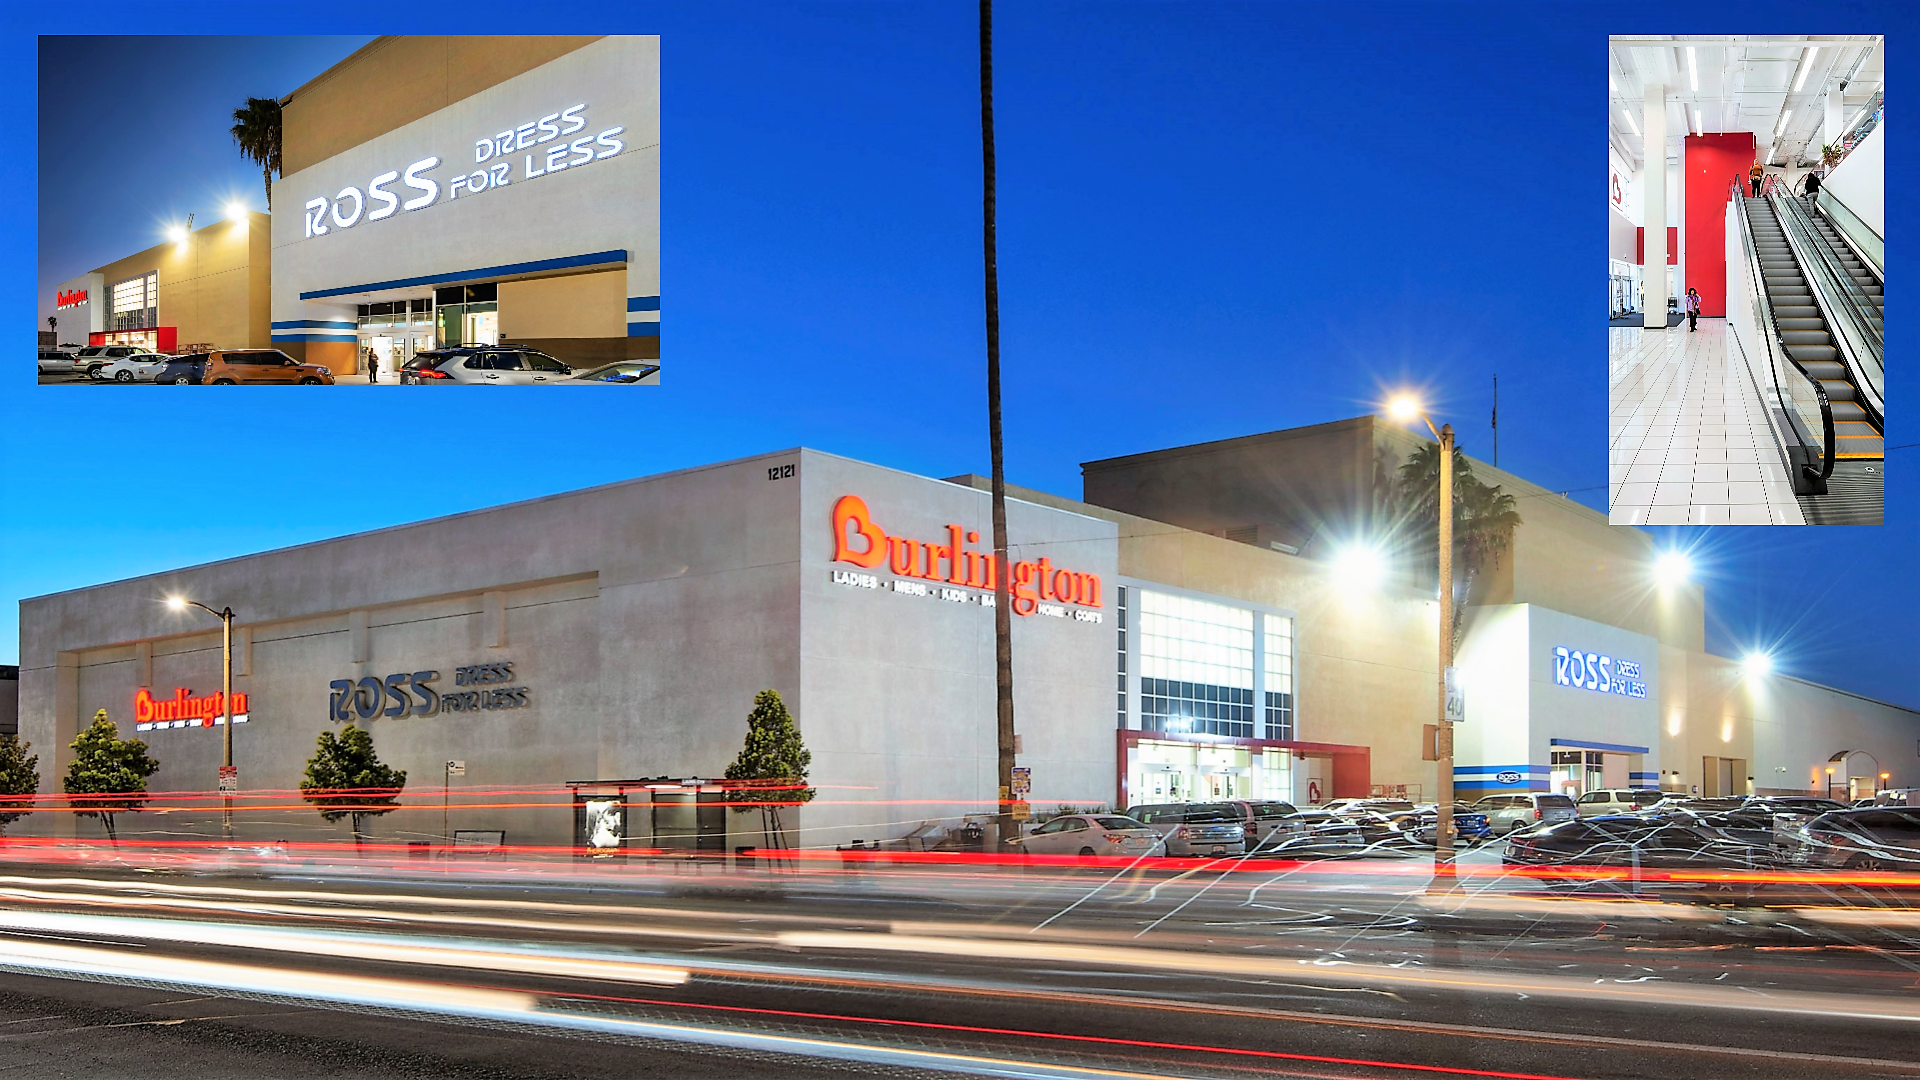 BurlingtonRoss New Stores in North Hollywood NIC